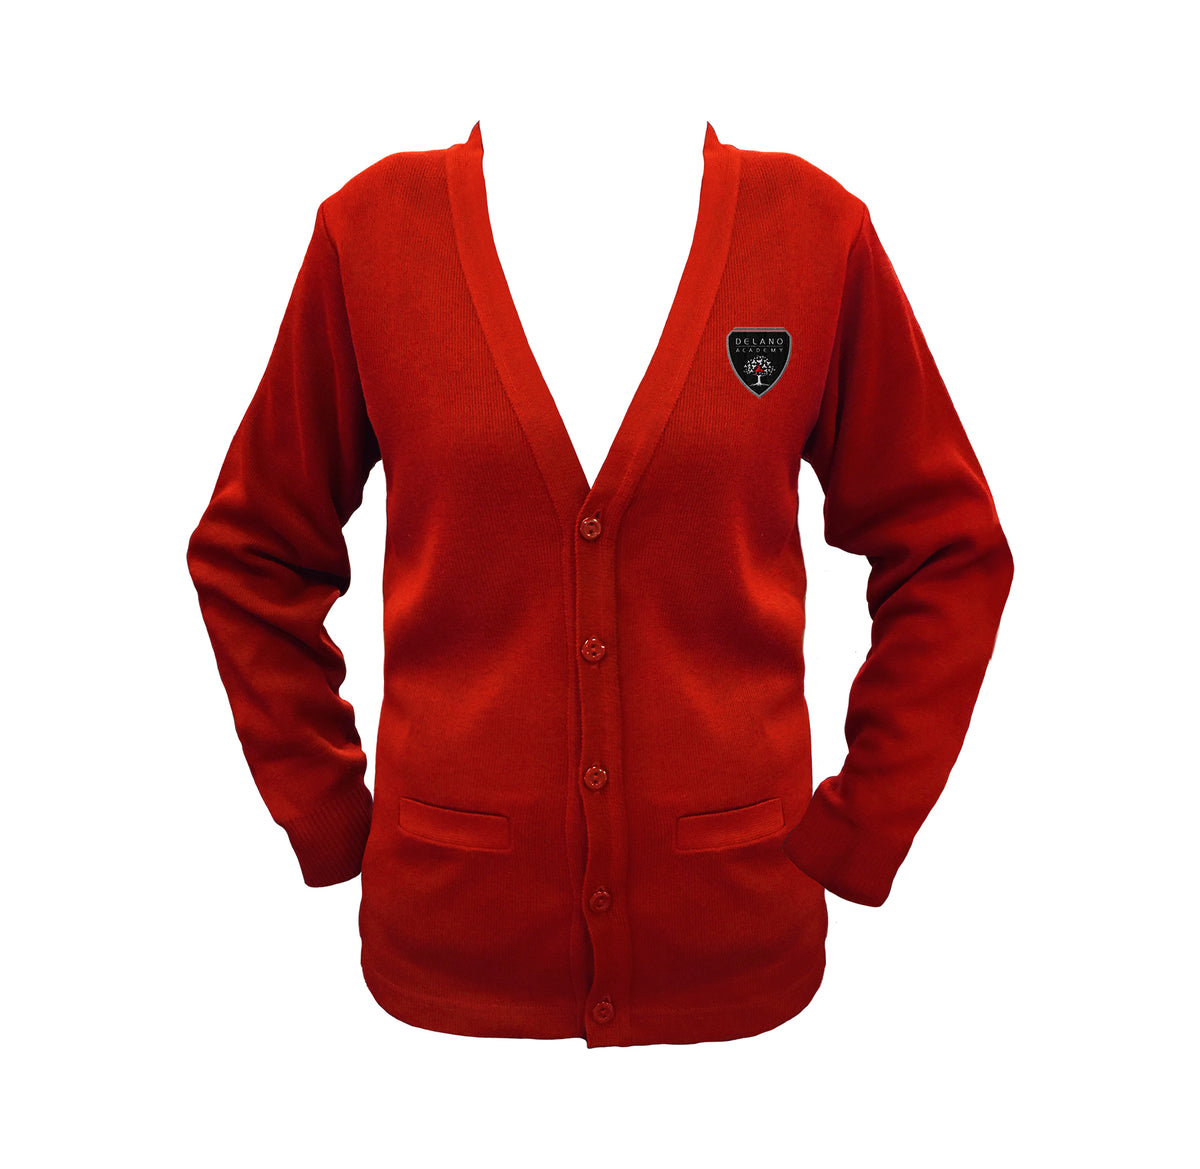 DELANO ACADEMY JRK-6 CARDIGAN, SIZE 34 AND UP